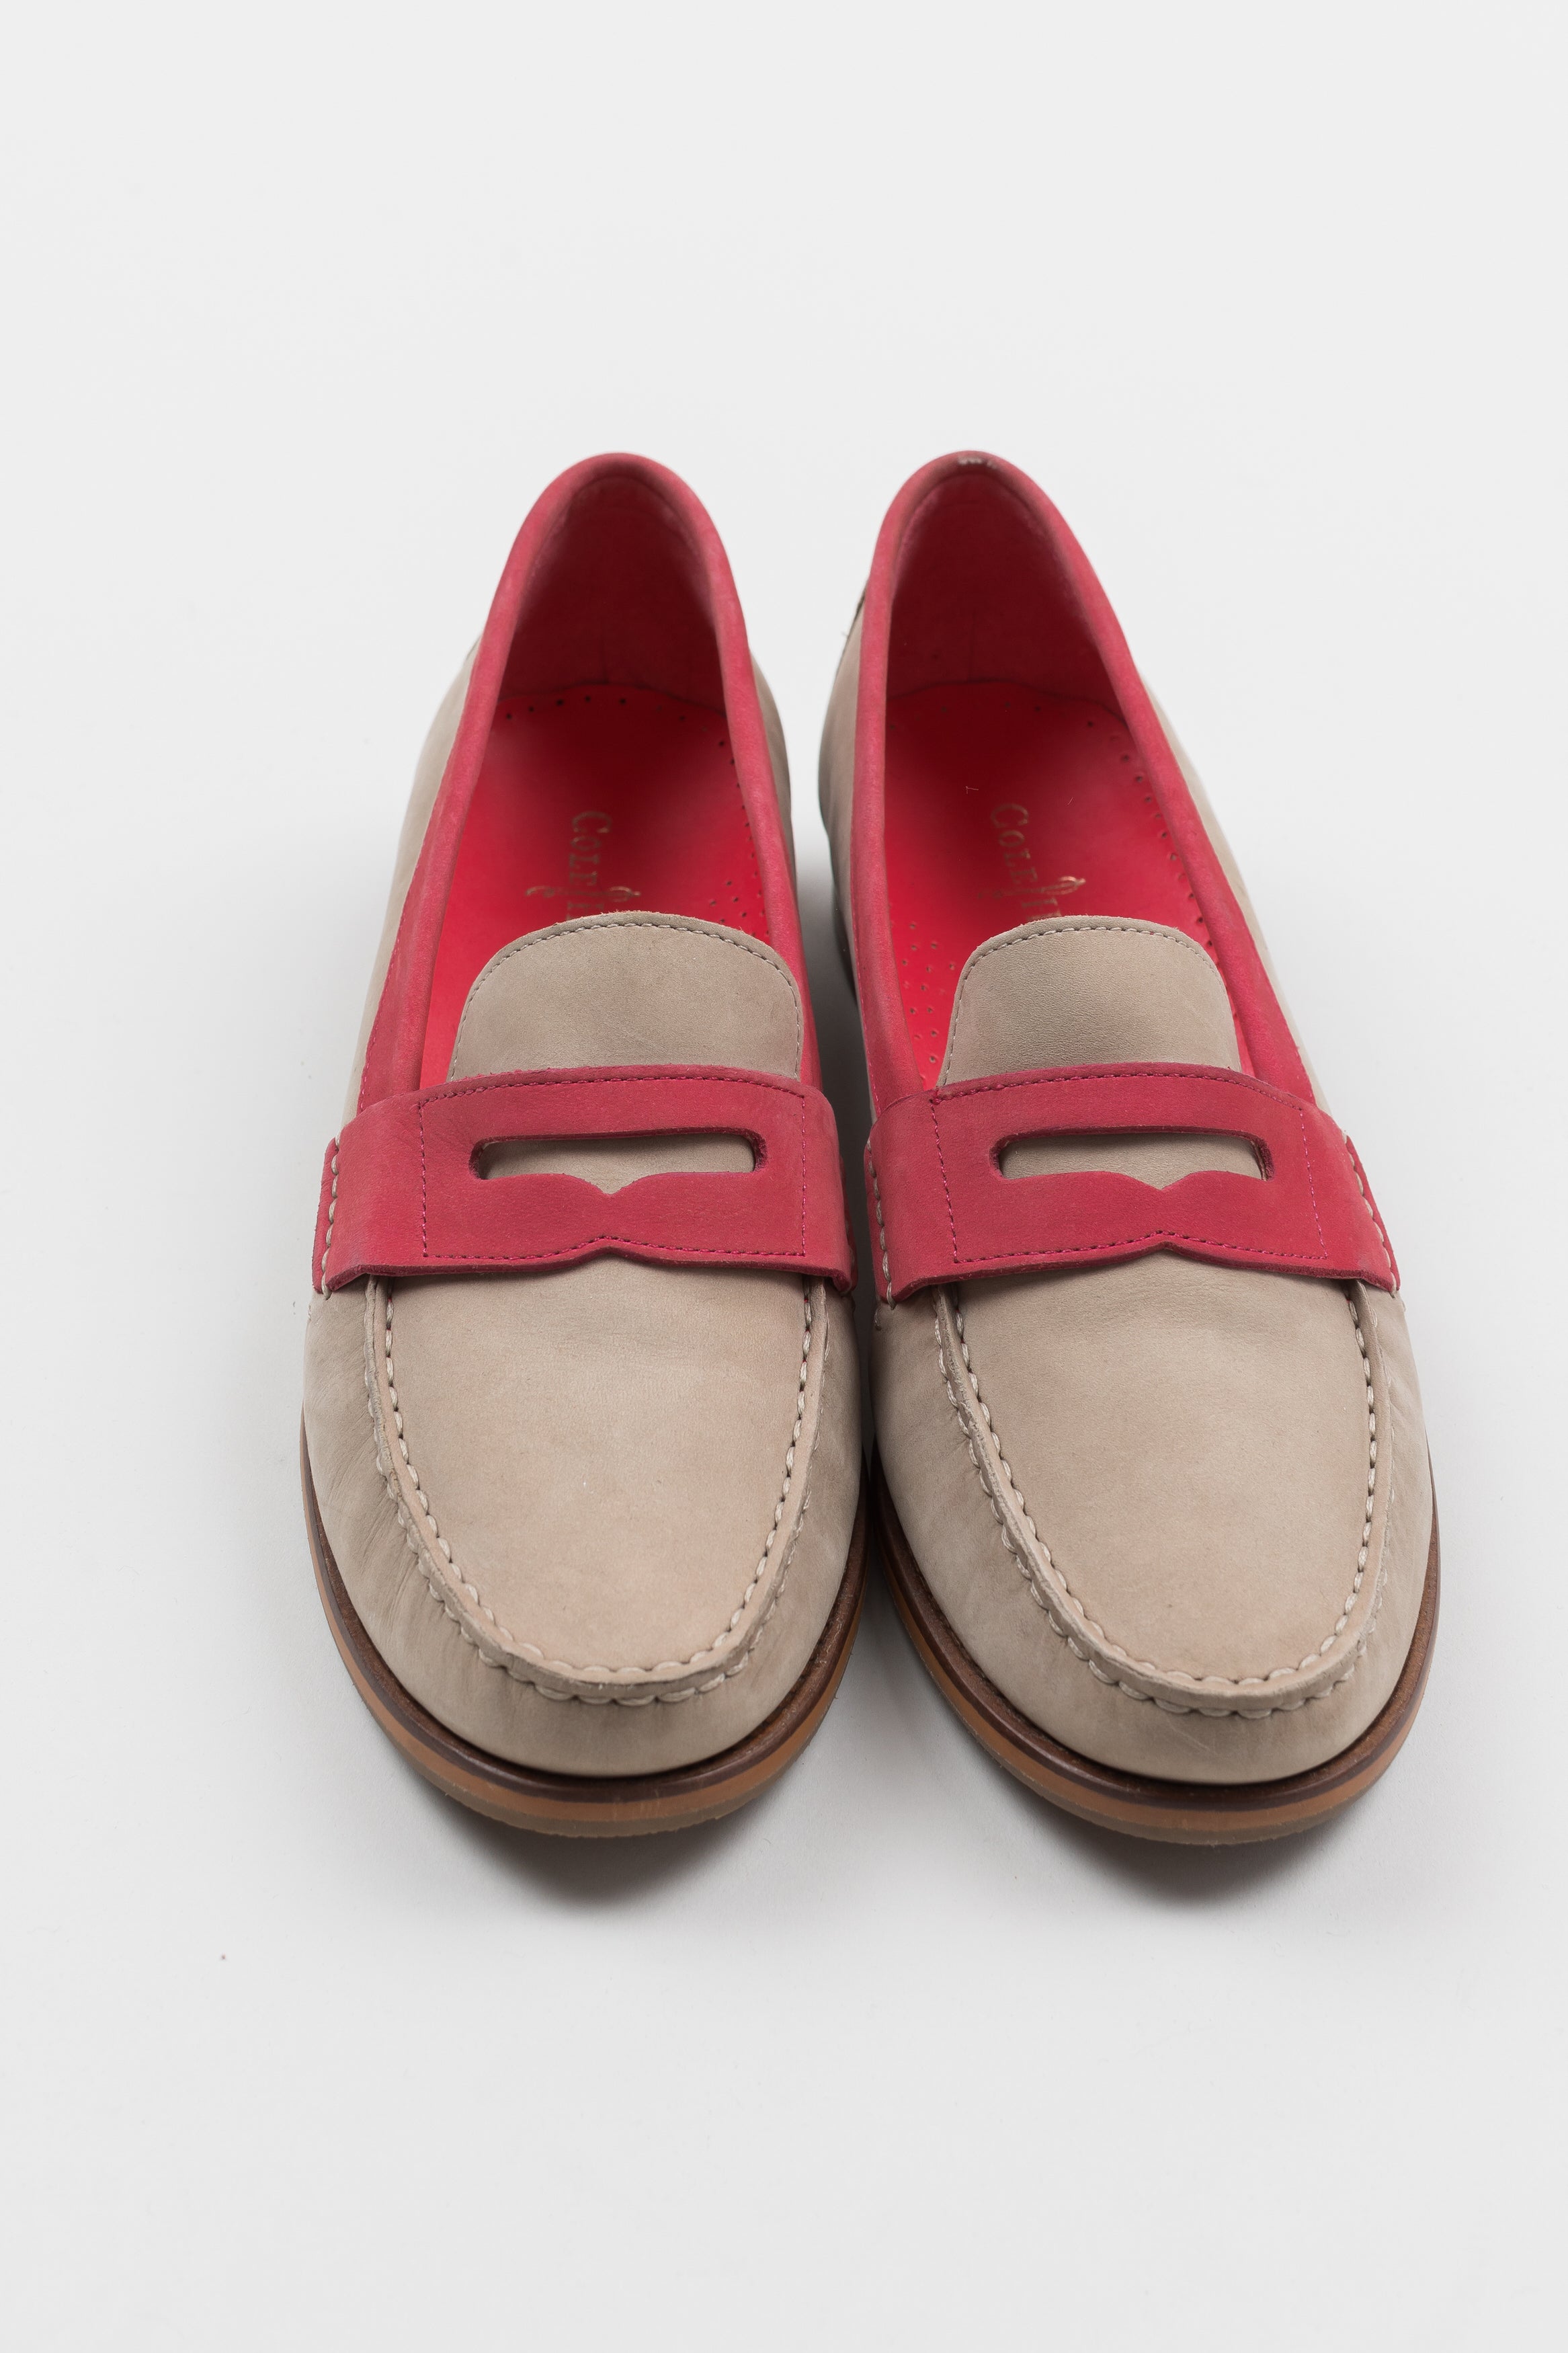 Cole Haan loafers (8)